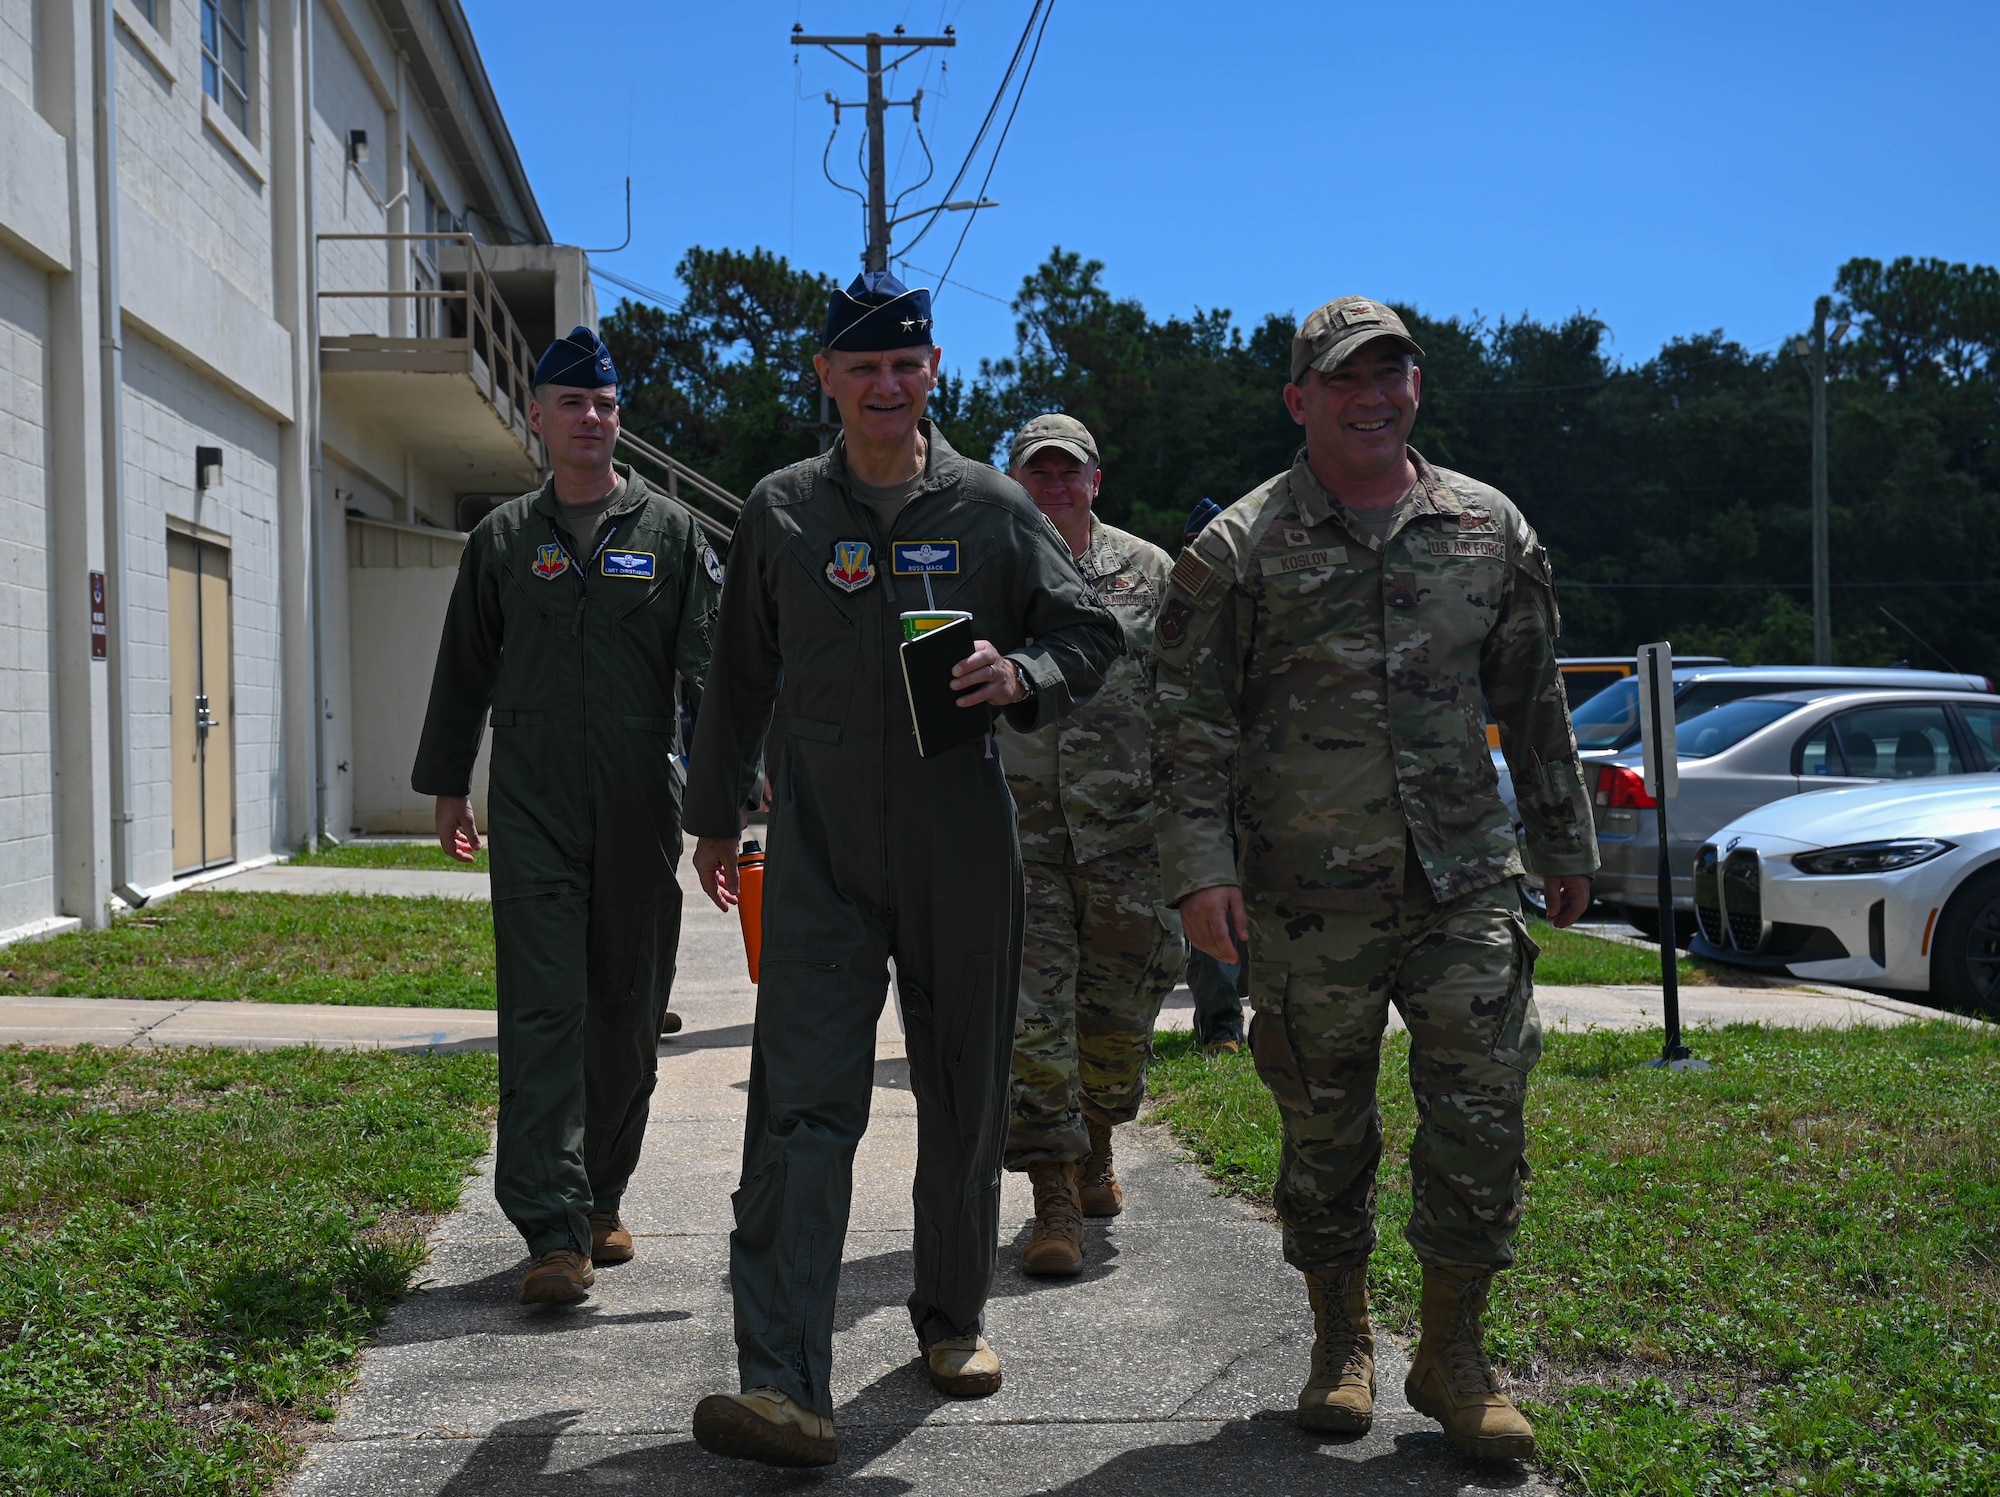 U.S. Air Force Lt. Gen. Russ Mack, deputy commander of Air Combat Command, center, walks with Col. Josh Koslov, 350th Spectrum Warfare Wing commander, right, and leadership during a visit to the wing at Eglin Air Force Base, Fla., Sept. 6, 2023. Mack visited the wing to learn more about its mission to develop and employ Electronic Warfare capabilities to warfighters. (U.S. Air Force photo by Capt. Benjamin Aronson)